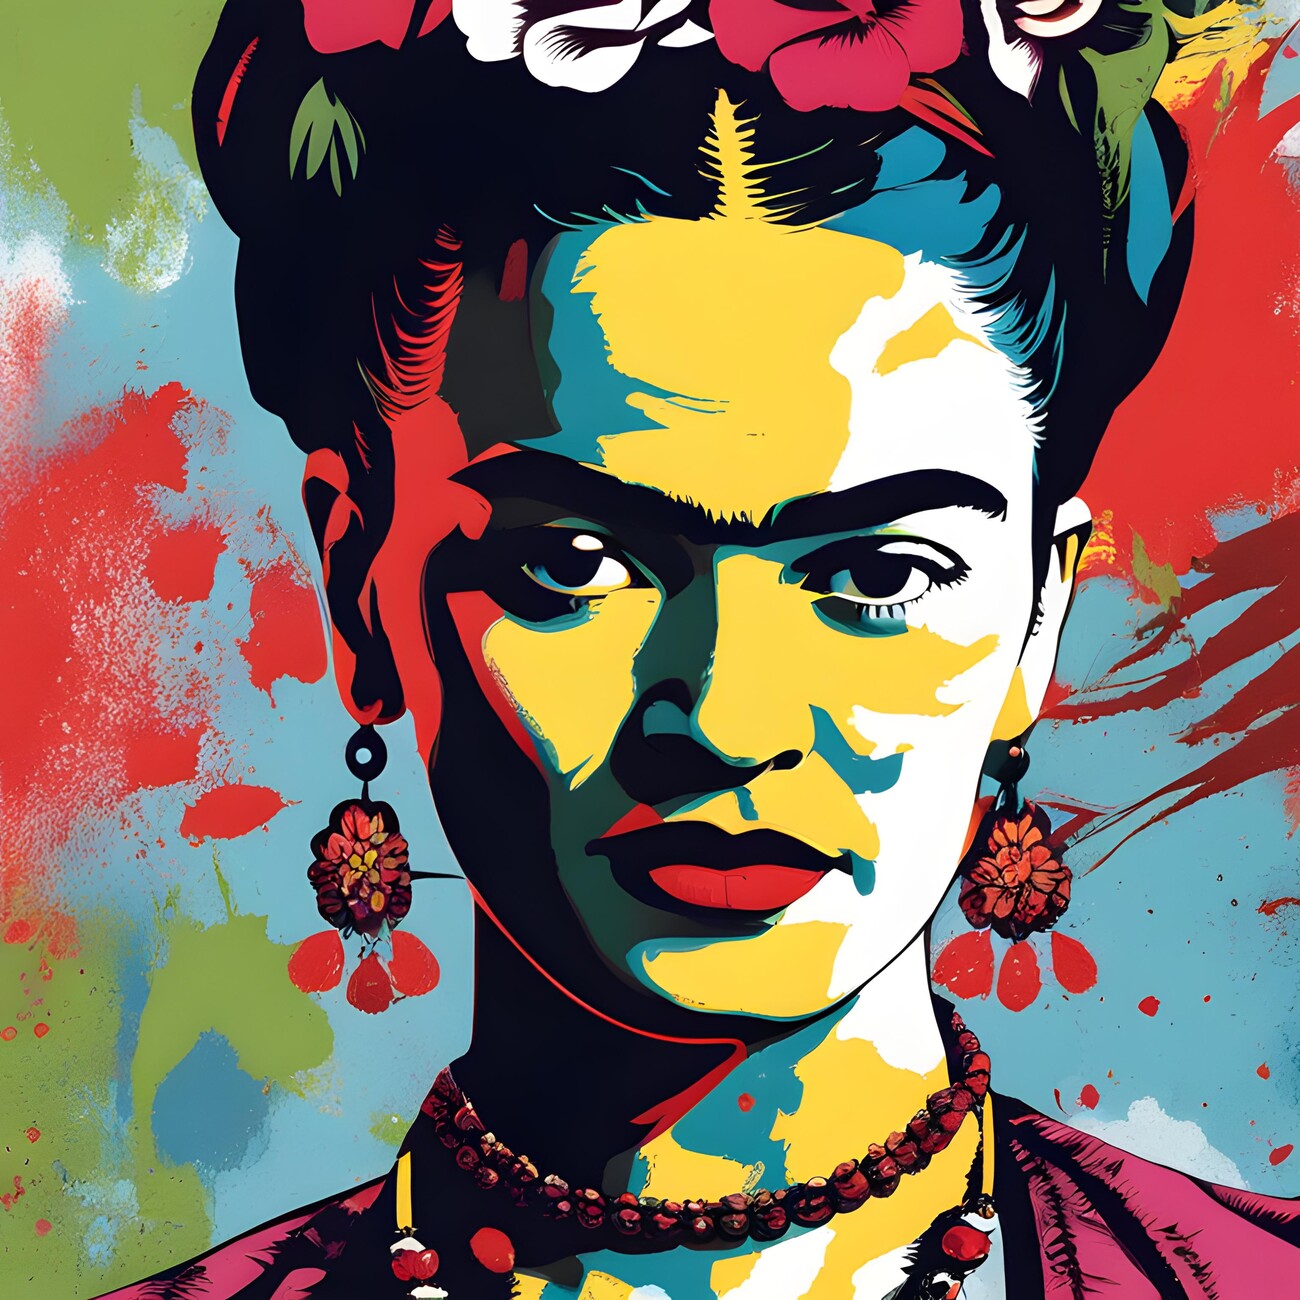 Frida Kahlo action figure – Today is Art Day